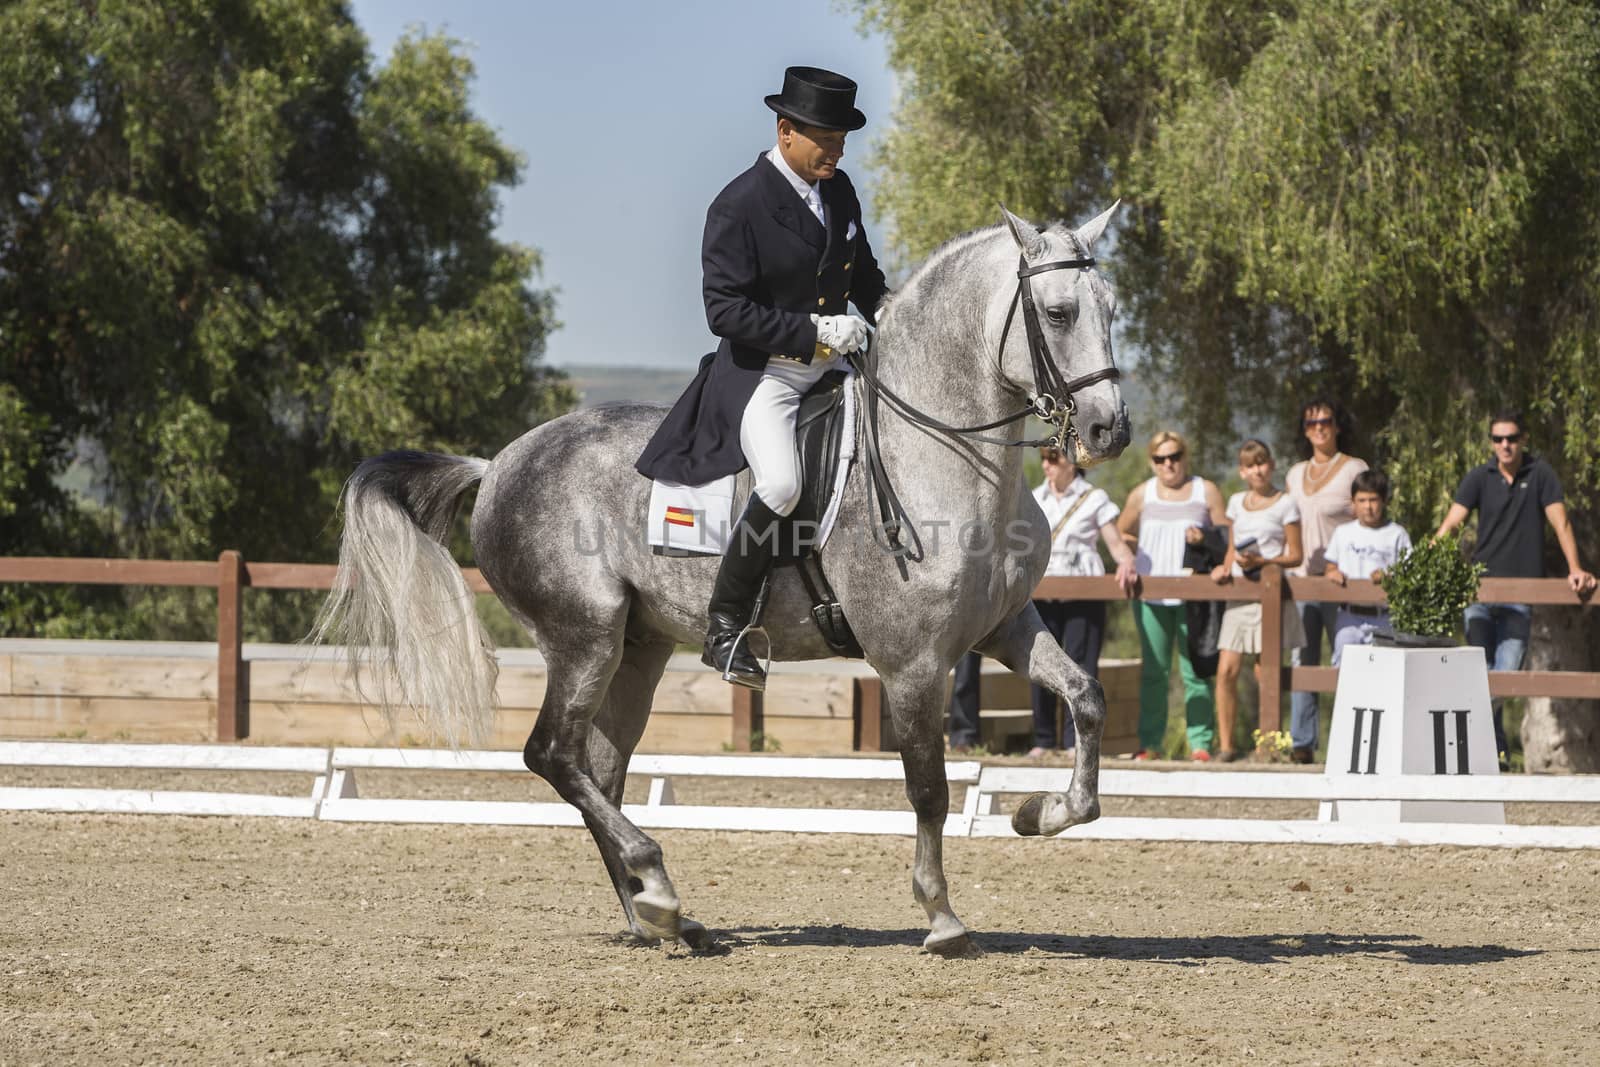 Montenmedio, Cadiz province, SPAIN - 12 july 2009: Spanish purebred horse competing in dressage competition classic, Montenmedio, Cadiz province, Andalusia, Spain